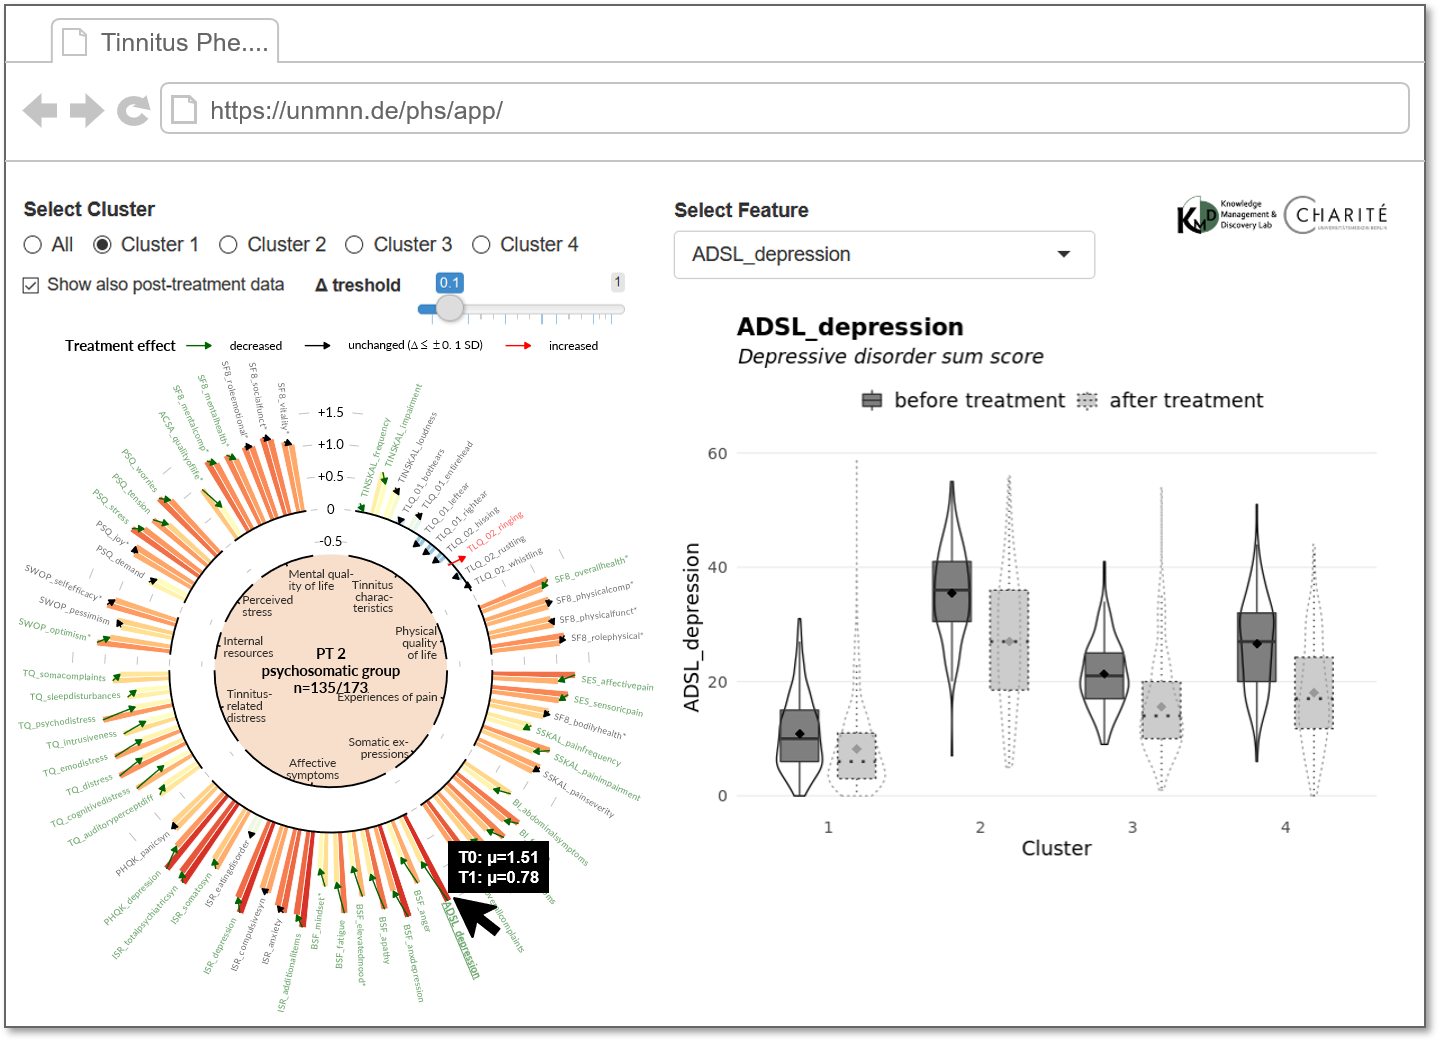 The user interface of the phenotype exploration application. Interactive components enhance the radial bar graphs: hovering over a bar or feature label opens a tooltip with additional cluster summaries and a compact feature description. Clicking on a feature updates the right plot showing the distribution of the selected feature stratified by cluster, and if selected, also after treatment. Continuous features are shown using semi-transparent boxplots placed on violin plot [164] layers. In contrast, for nominal features, category proportions alongside their 95% confidence intervals are displayed as points and error lines, respectively.